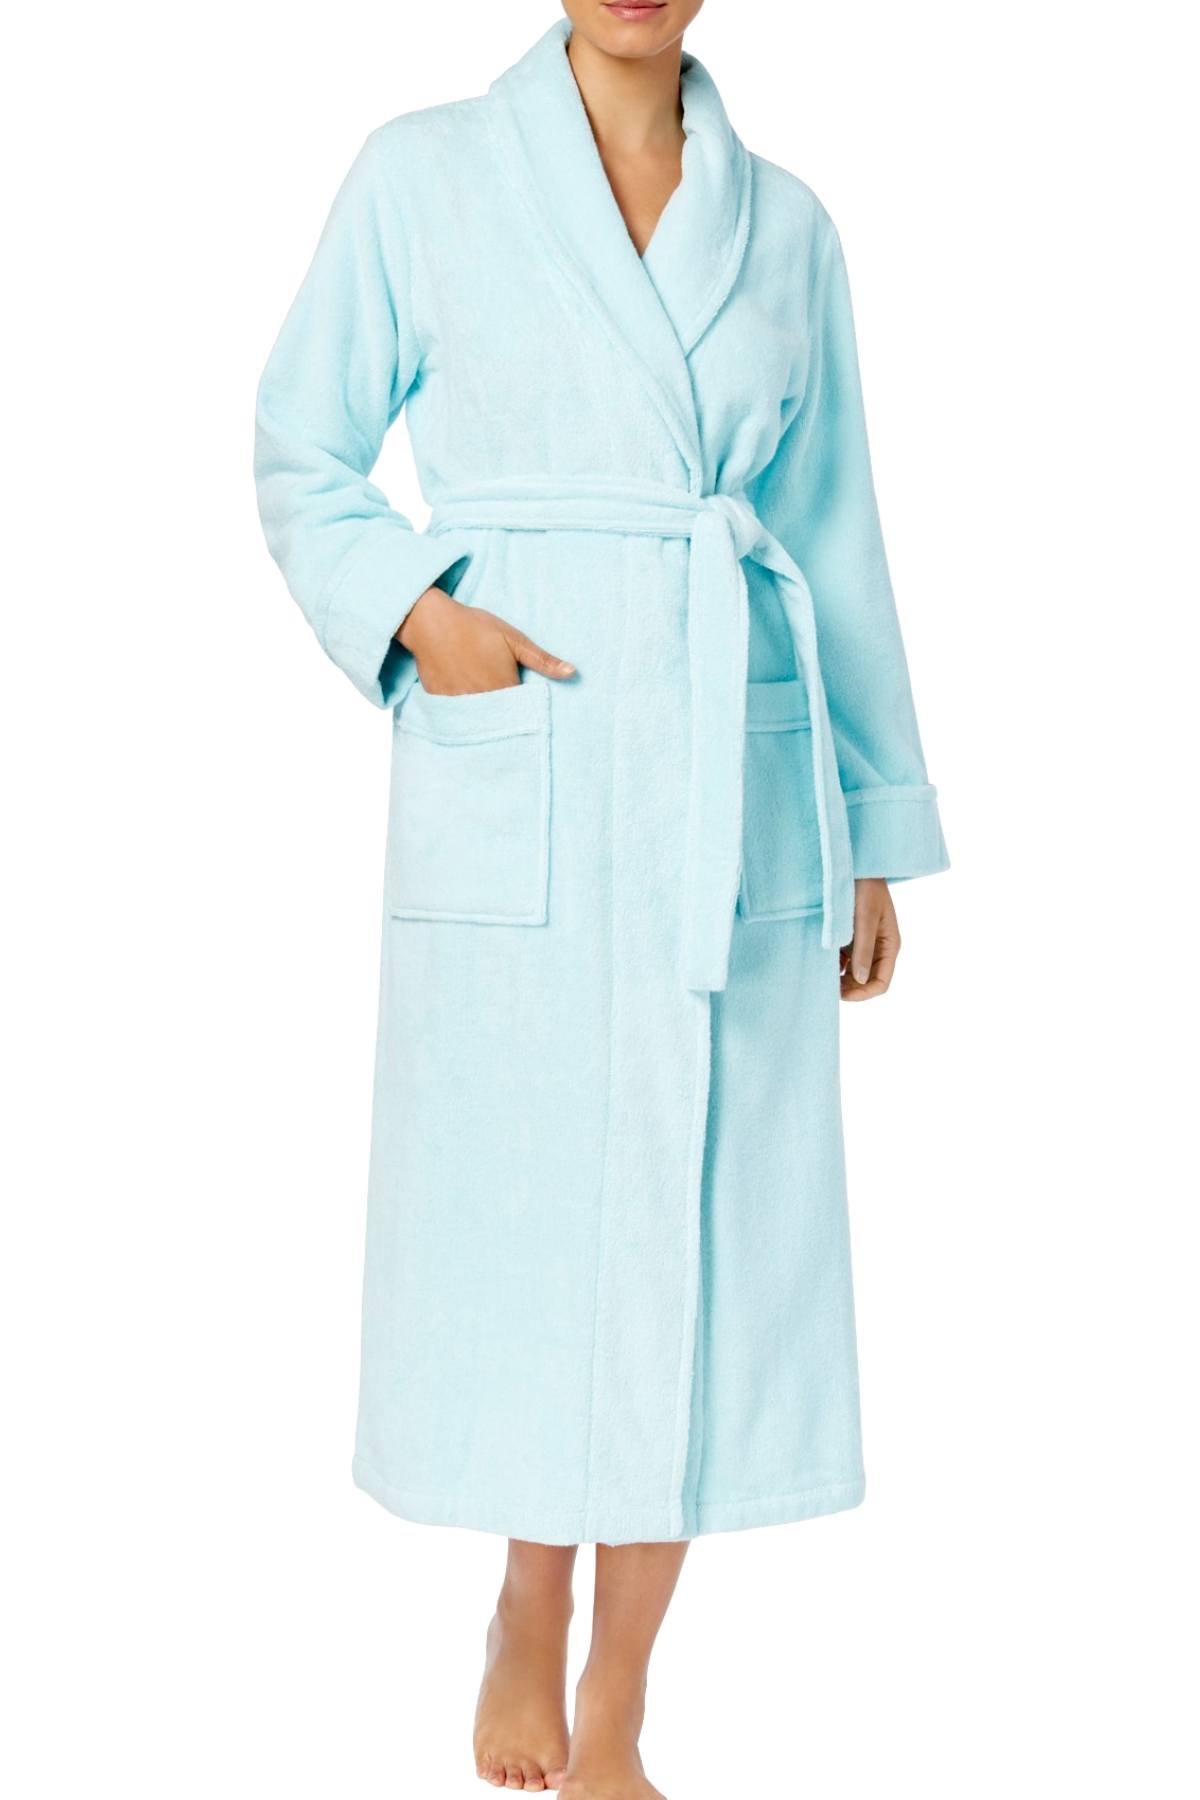 Charter Club Intimates Soft-Rain-Blue Luxe Cotton Terry Long Wrap-Robe